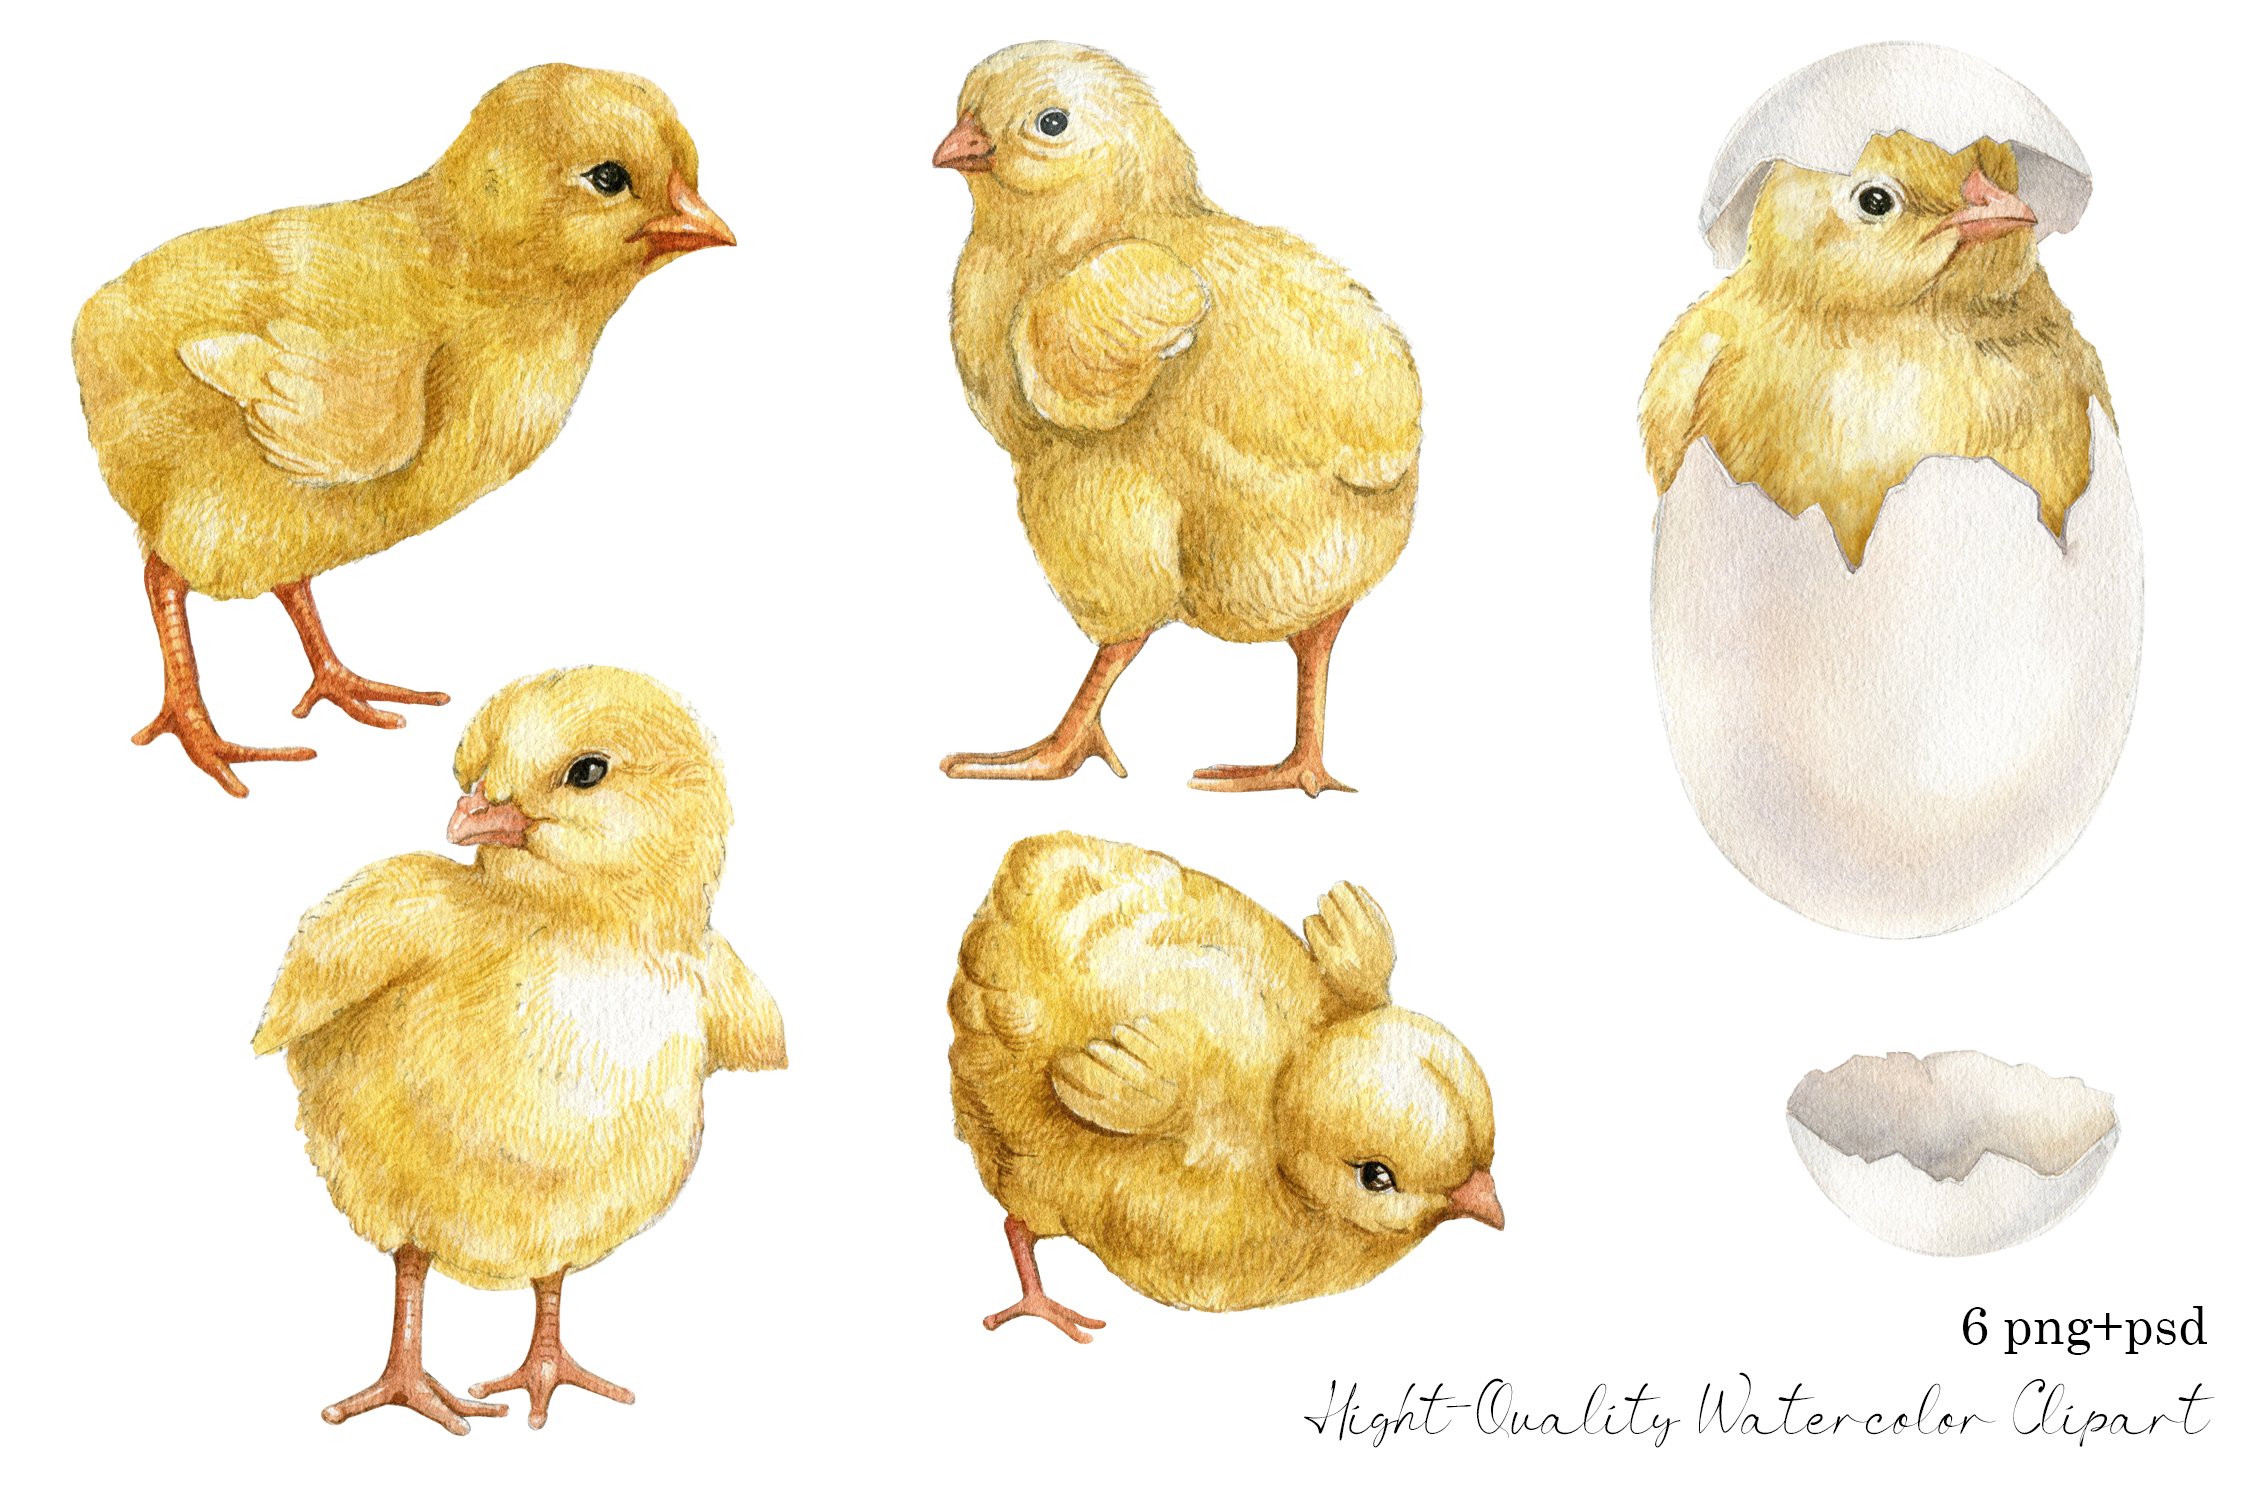 Little yellow chickens.